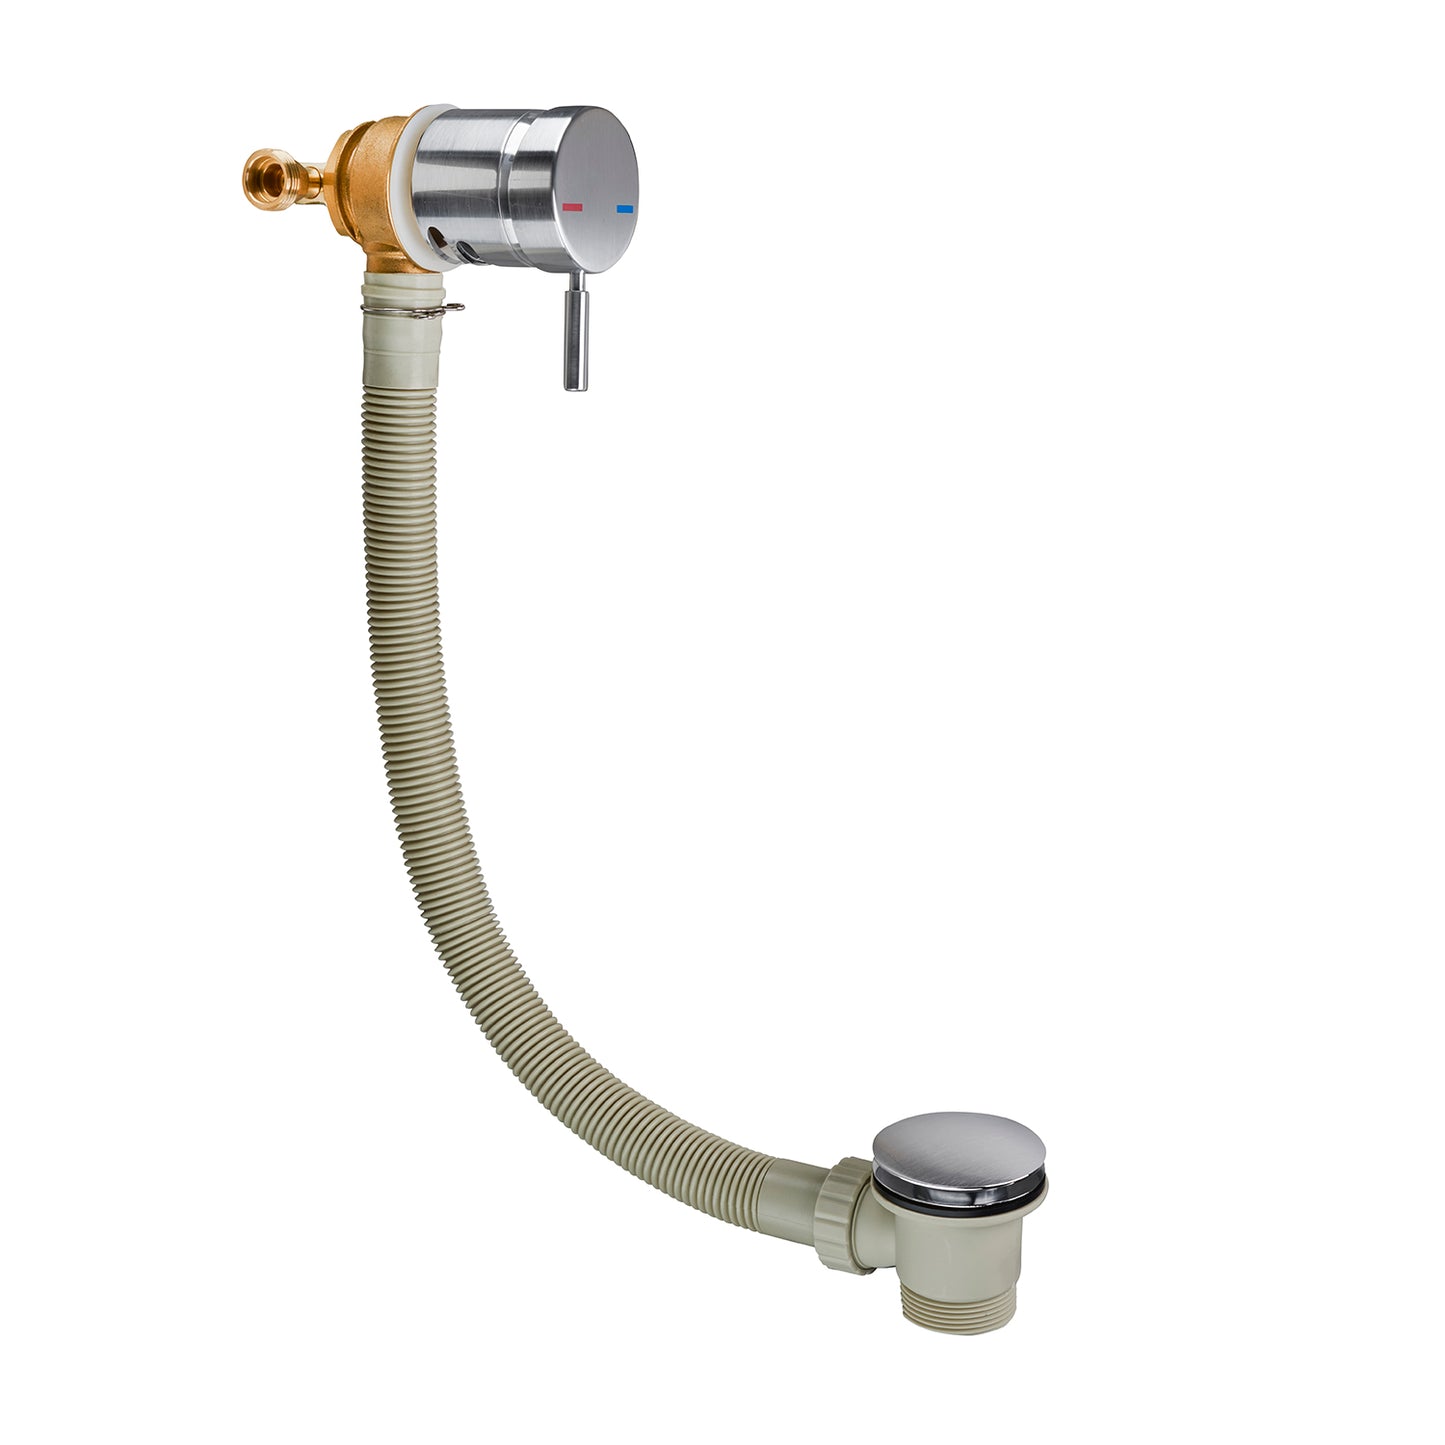 Sandy Beach Brushed Chrome Bath Mixer Tap Filler Overflow with Pop-Up Waste